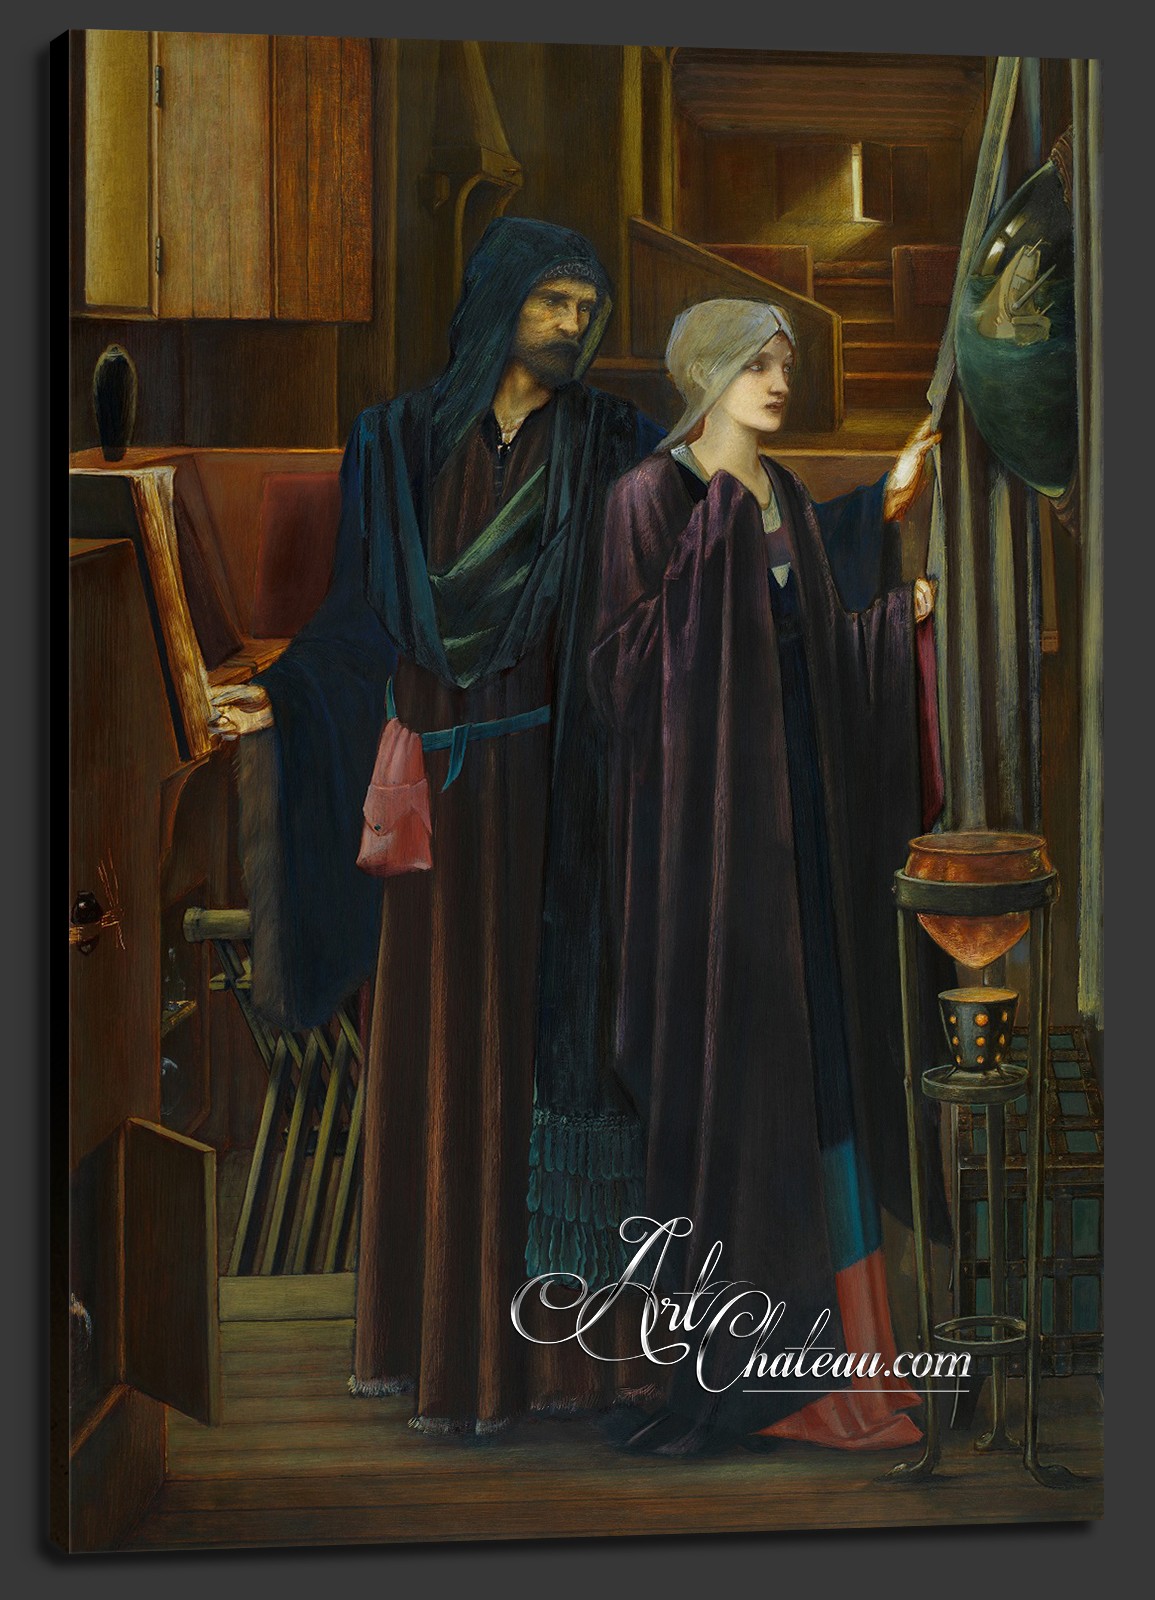 The Wizard and the Maiden, after Edward Burne-Jones